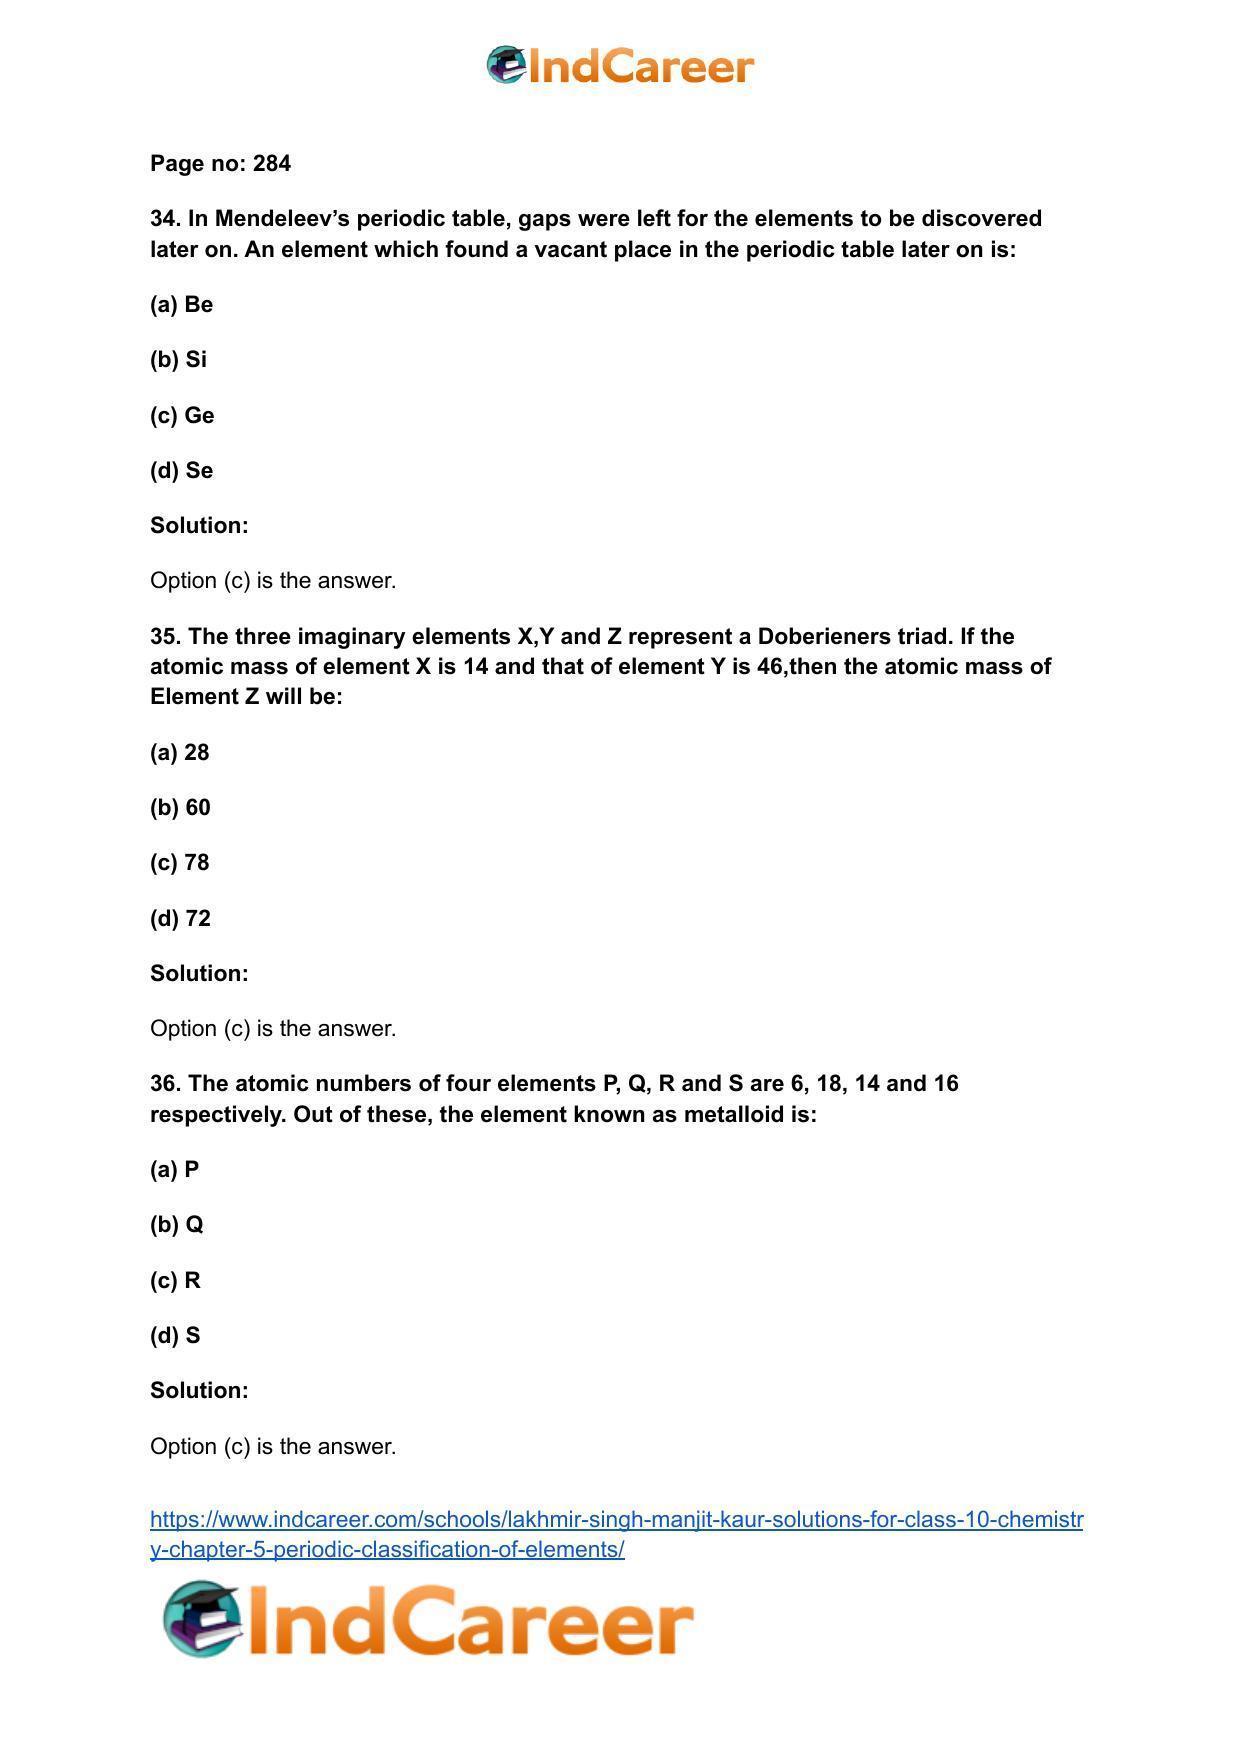 Lakhmir Singh Manjit Kaur  Solutions for Class 10 Chemistry: Chapter 5- Periodic Classification Of Elements - Page 14